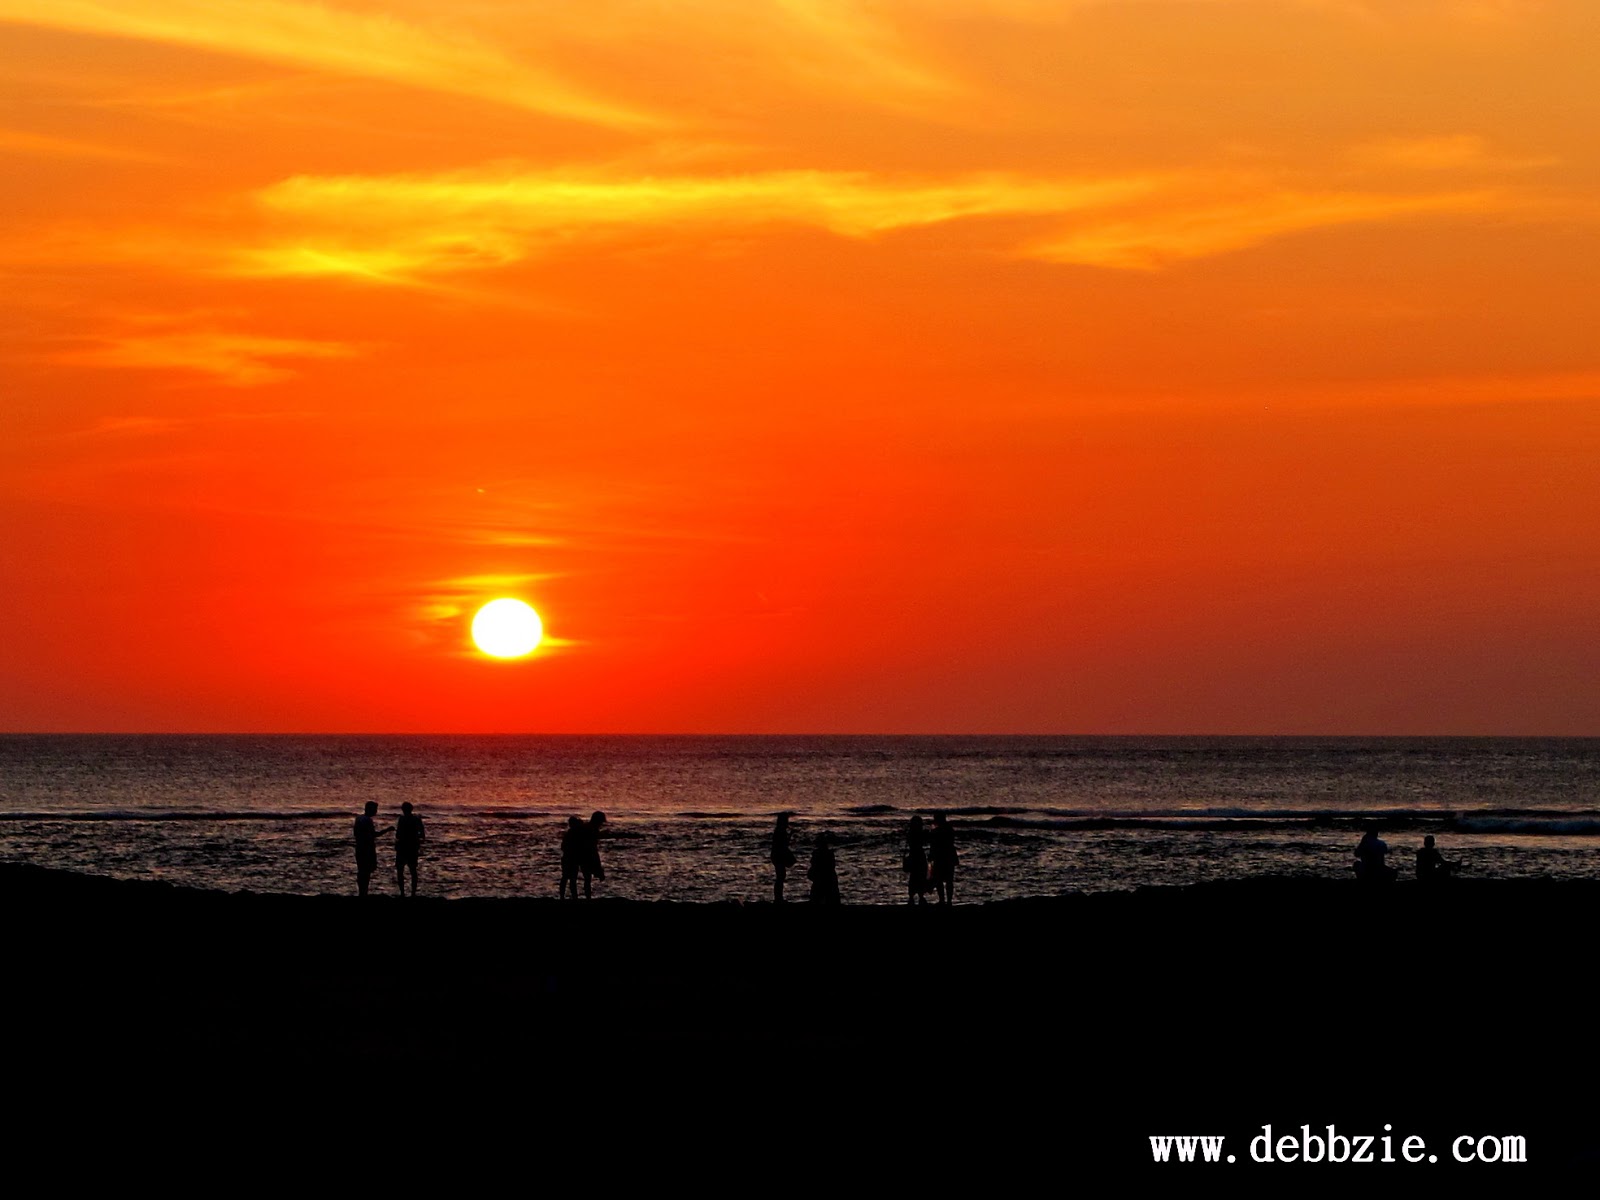 My Time Capsule: Indonesia: 15 Photos of Sunset in Bali